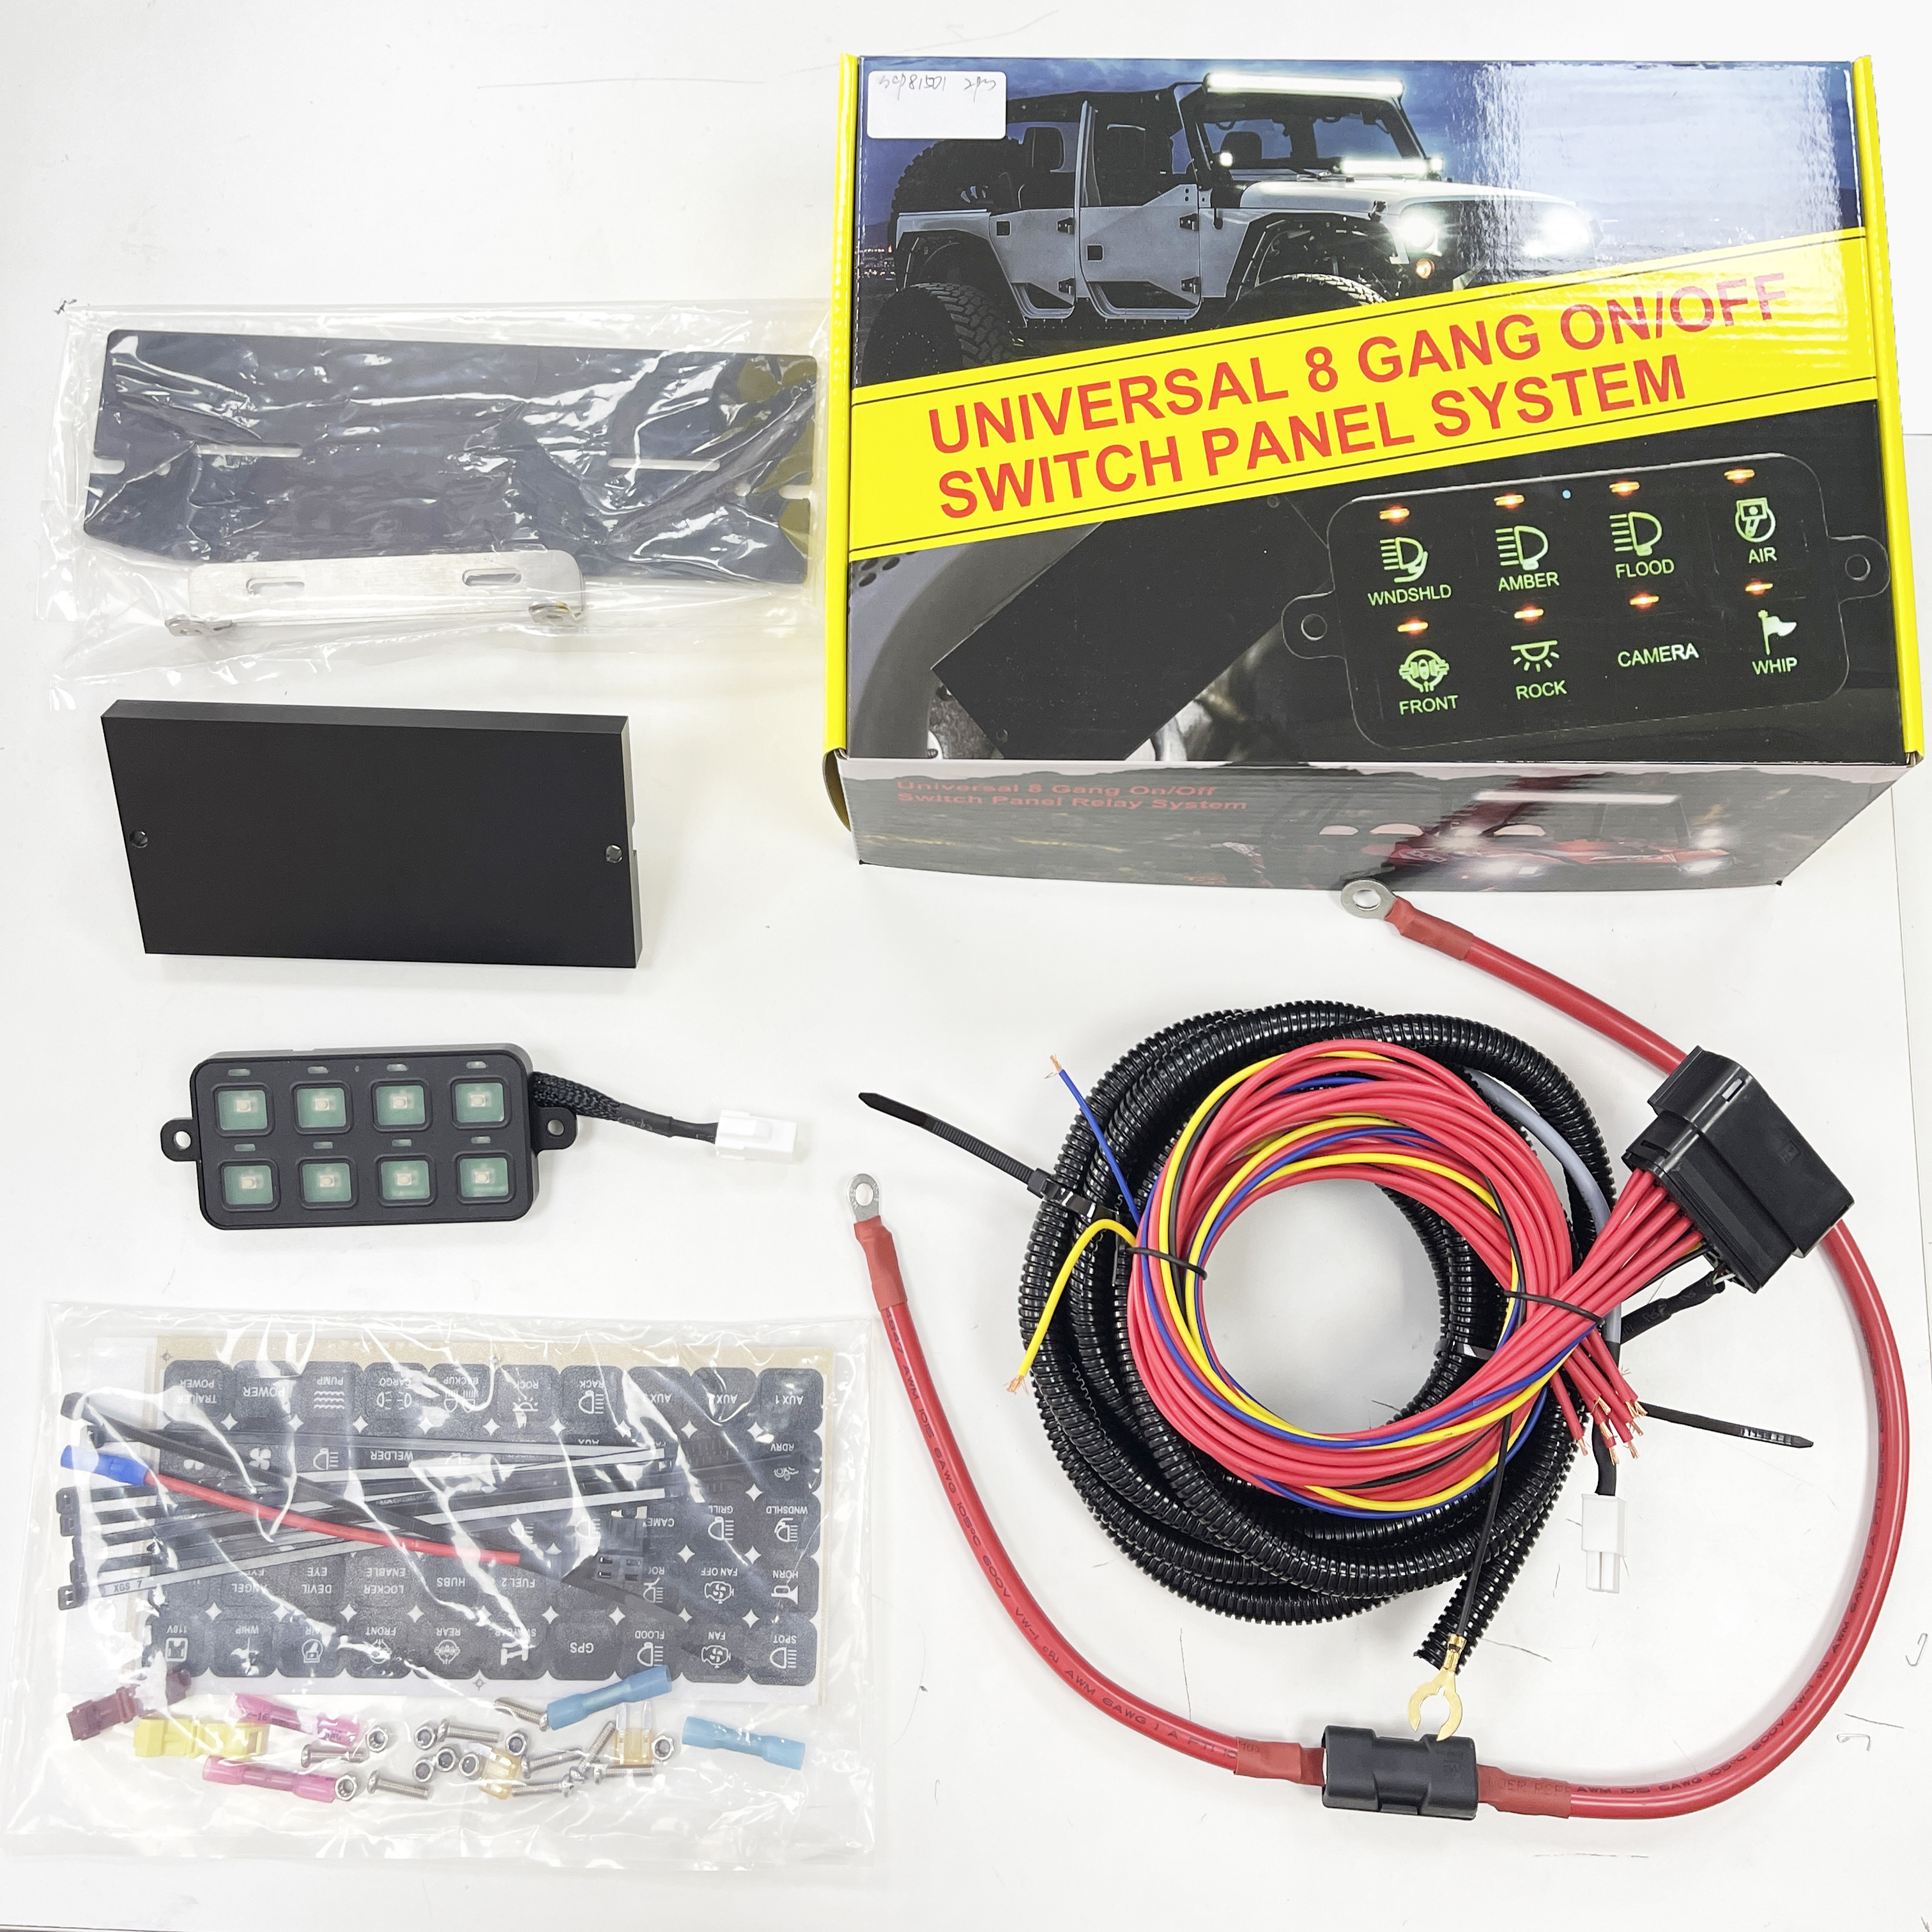 https://www.yujiepower.com/auto-on-off-rgb-led-car-switch-box-universal-touch-panel-product/